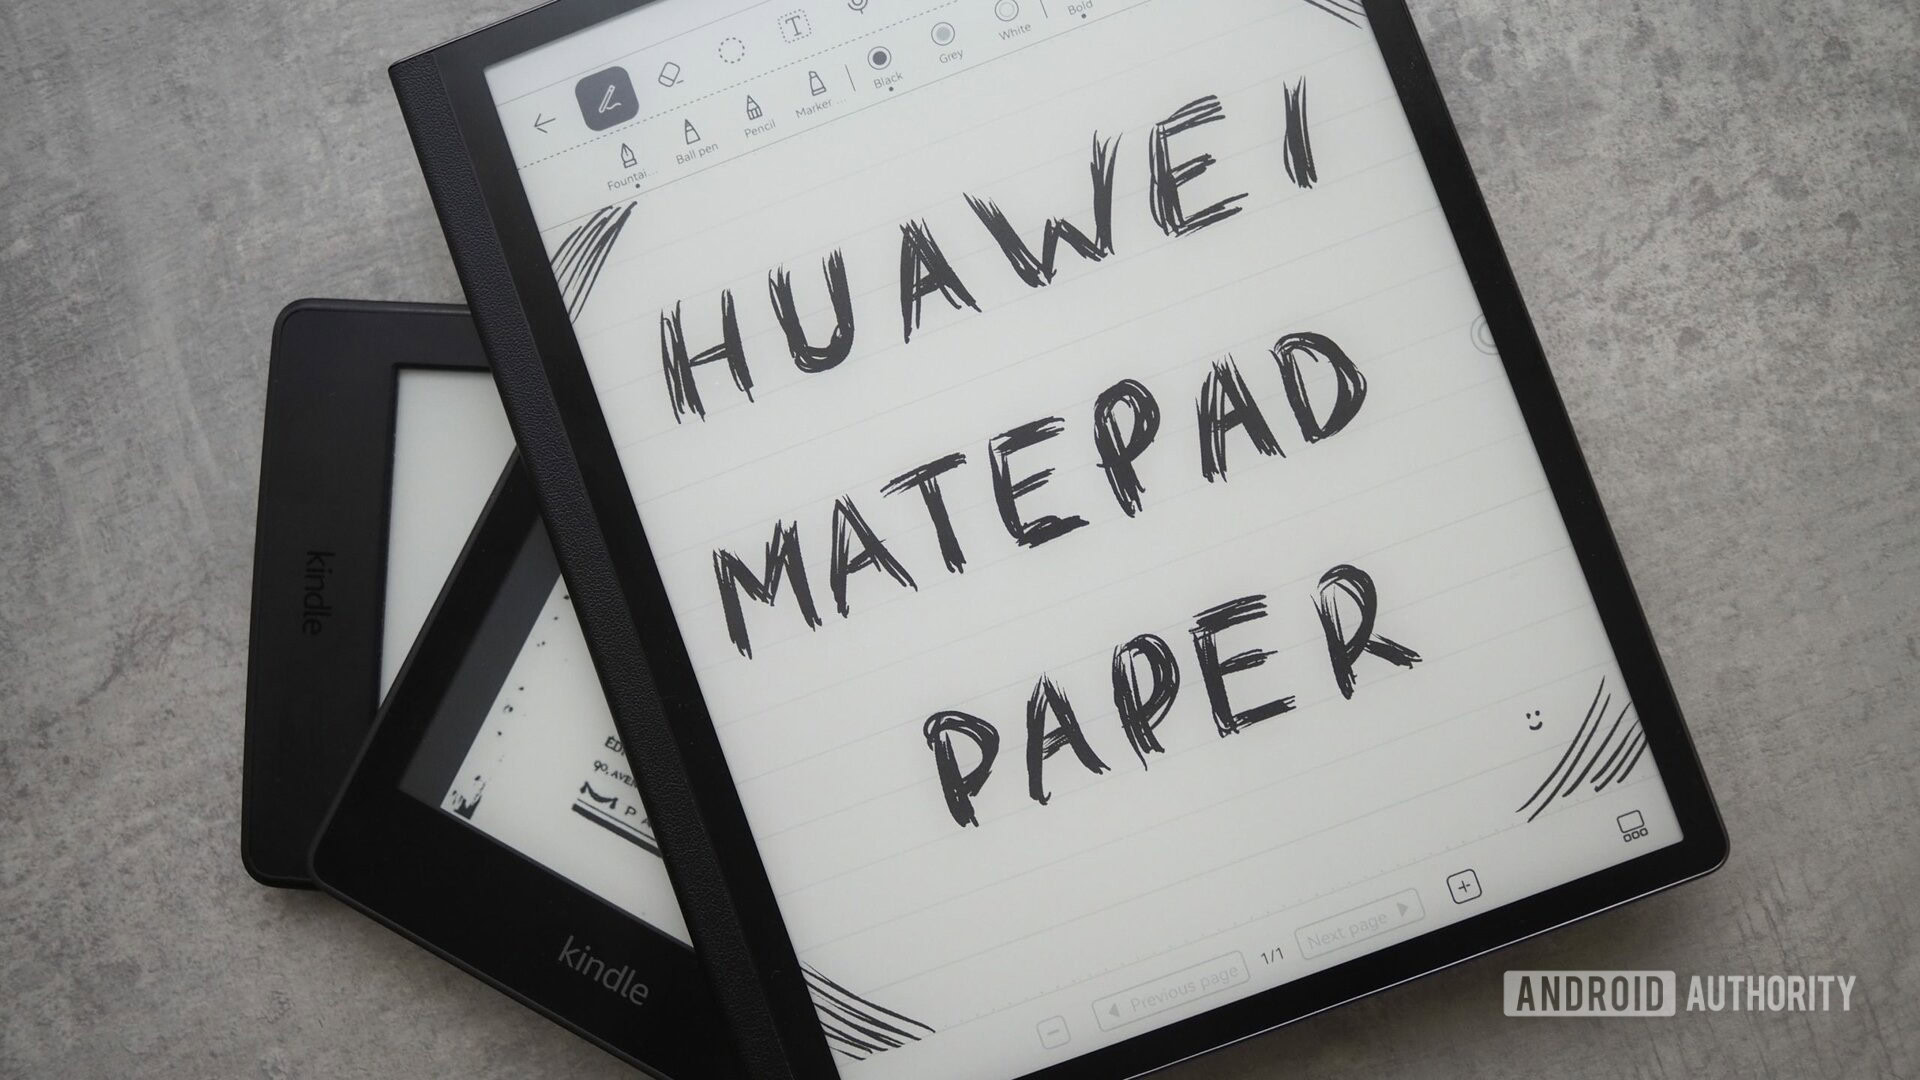 HUAWEI Matepad Paper review: Sorry, e-ink and Android aren't a good fit